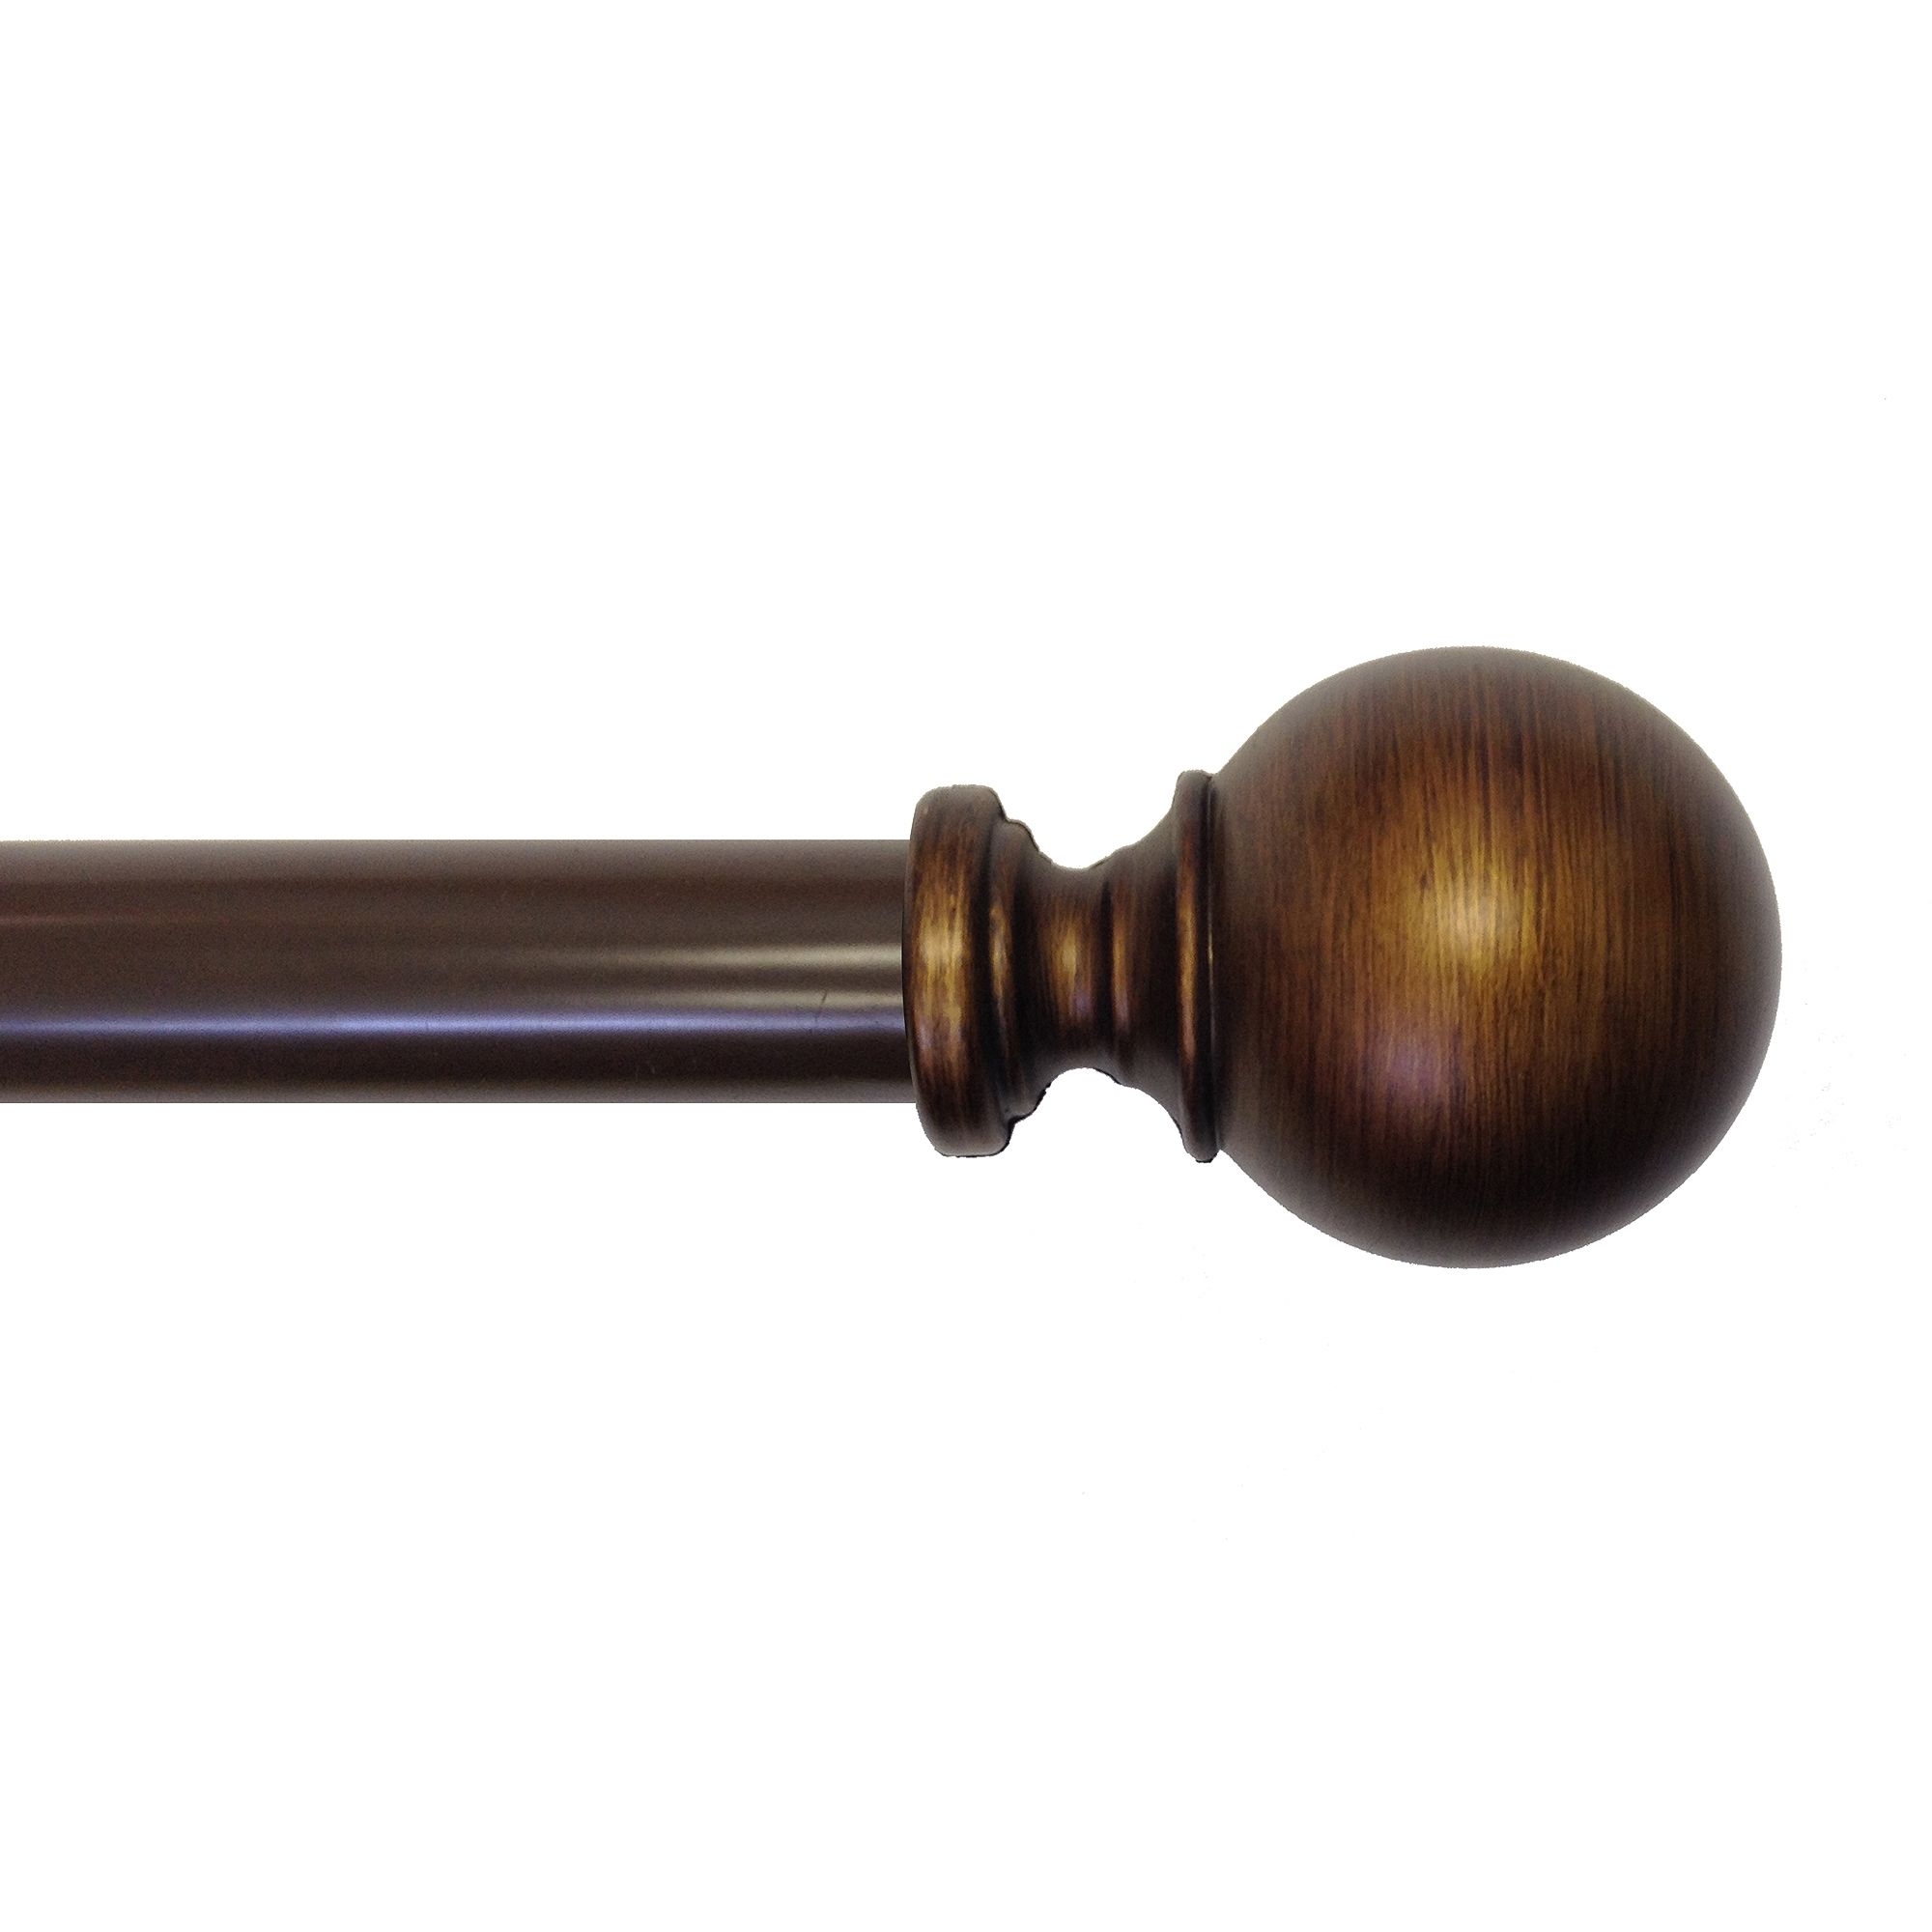 Mainstays 1 Diameter Decorative Curtain Rod With Ball Finial In Deep Curtain Rods (View 5 of 25)